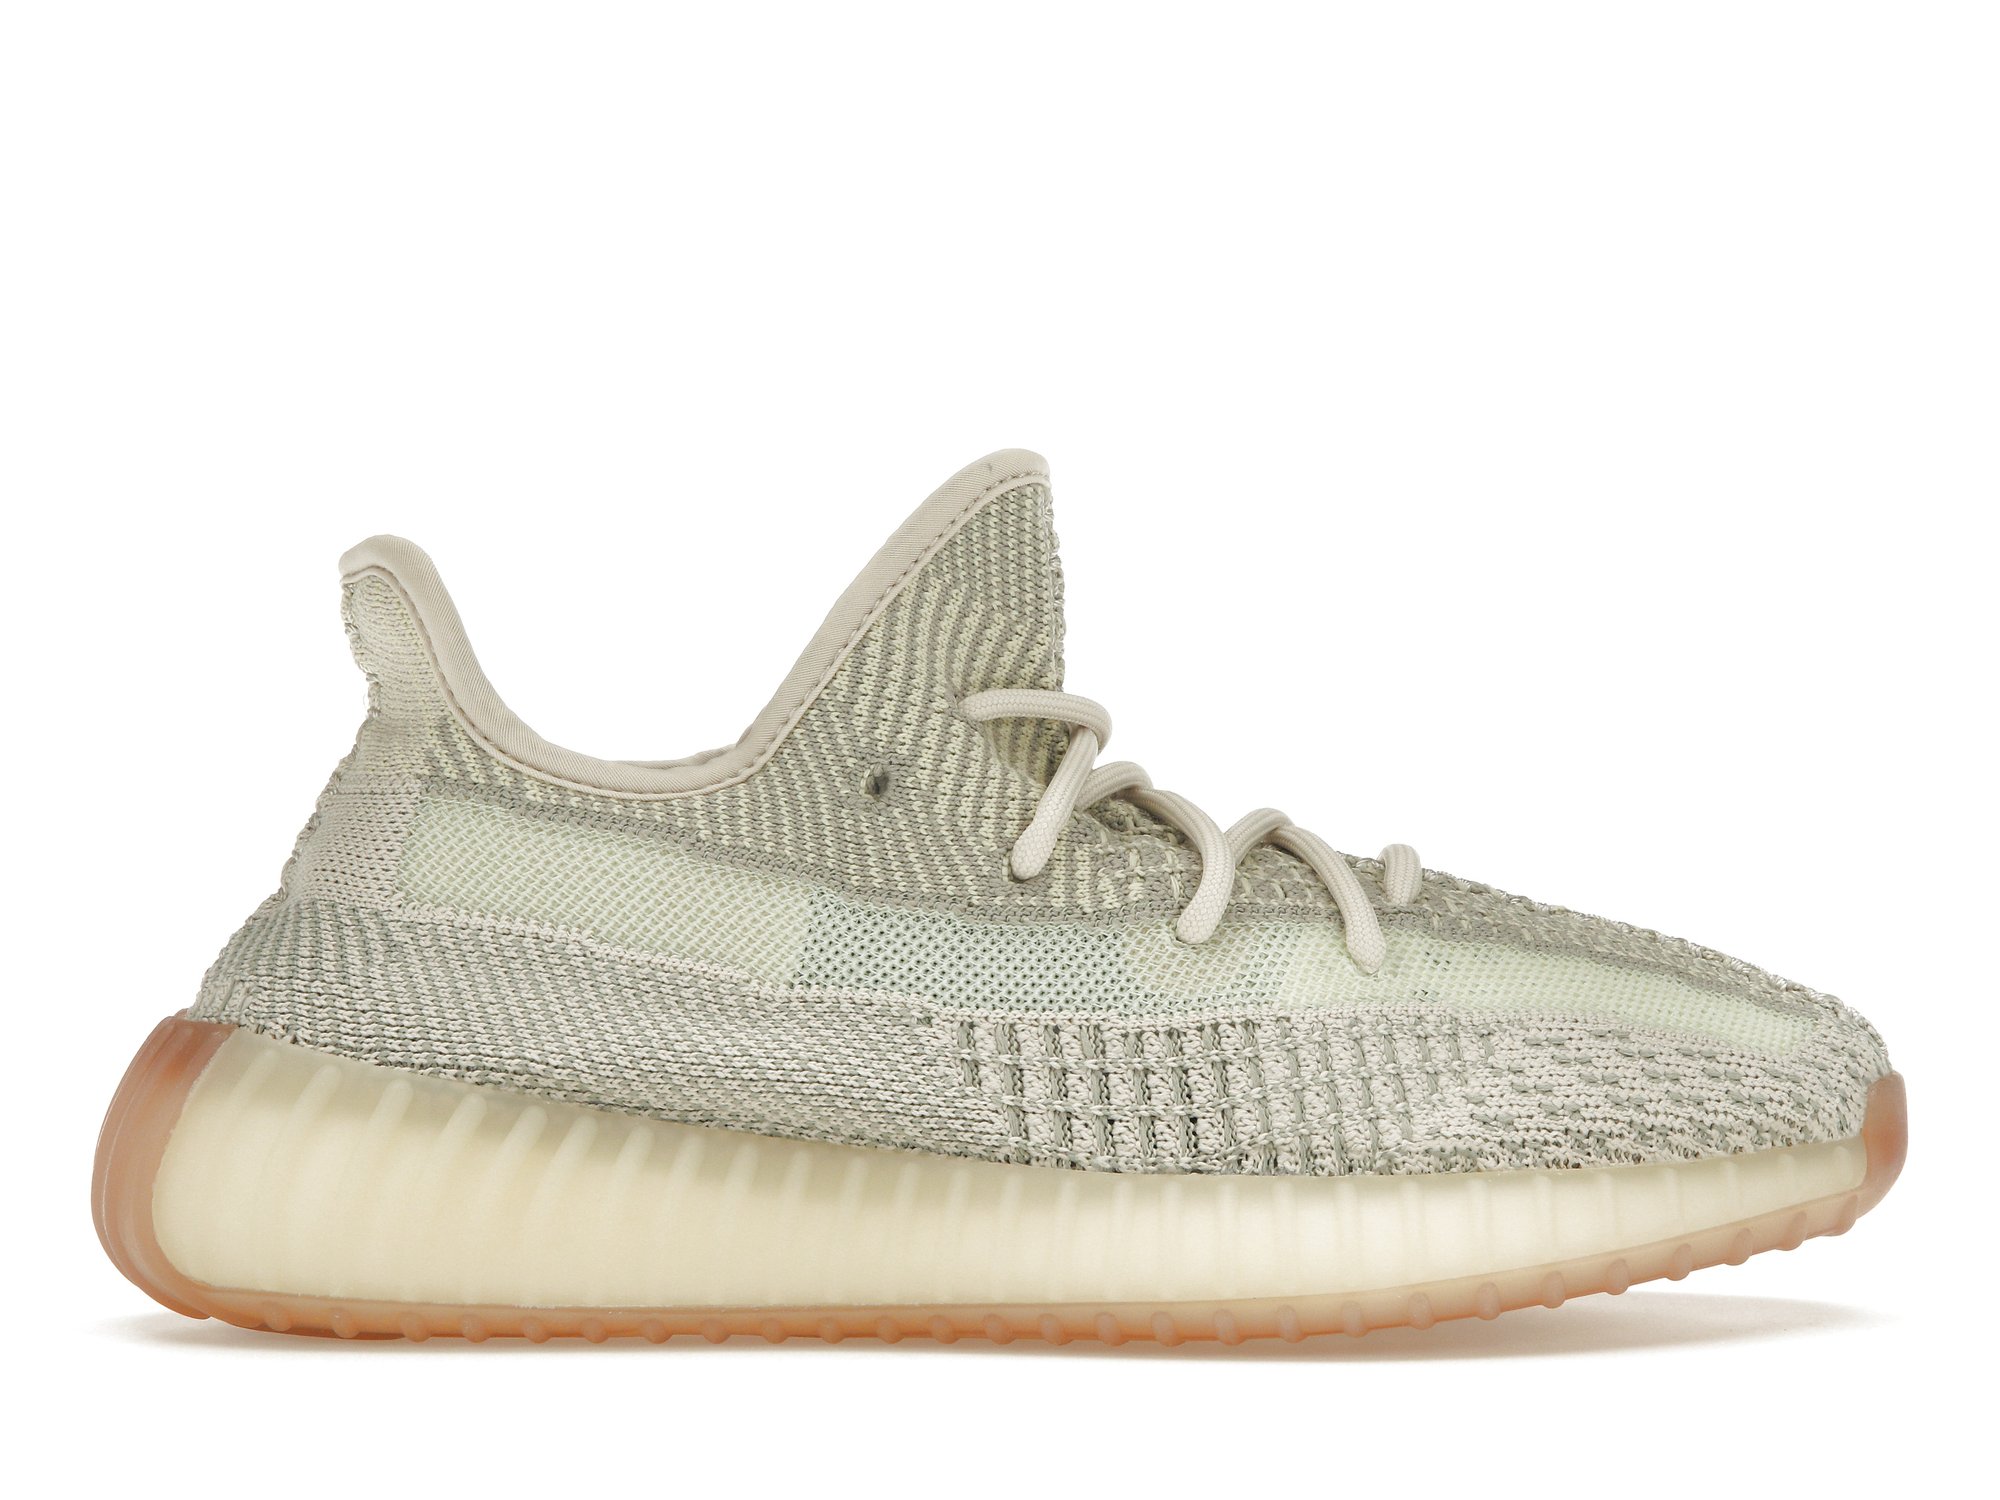 yeezy boost 350 v2 citrin release date